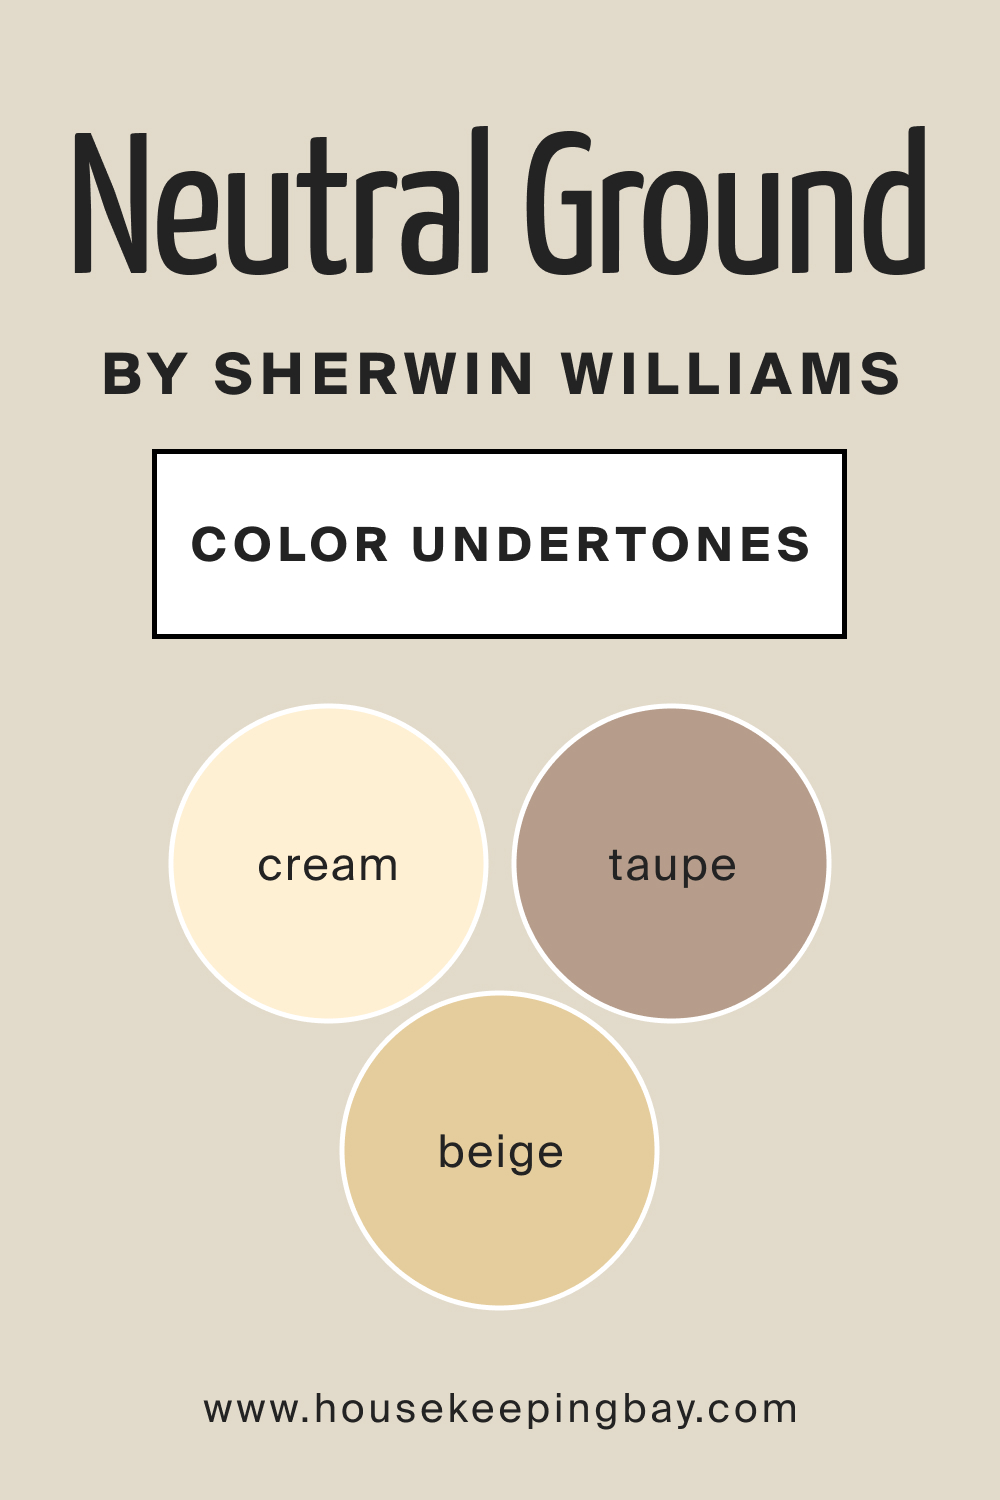 Neutral Ground by Sherwin Williams Color Undertone